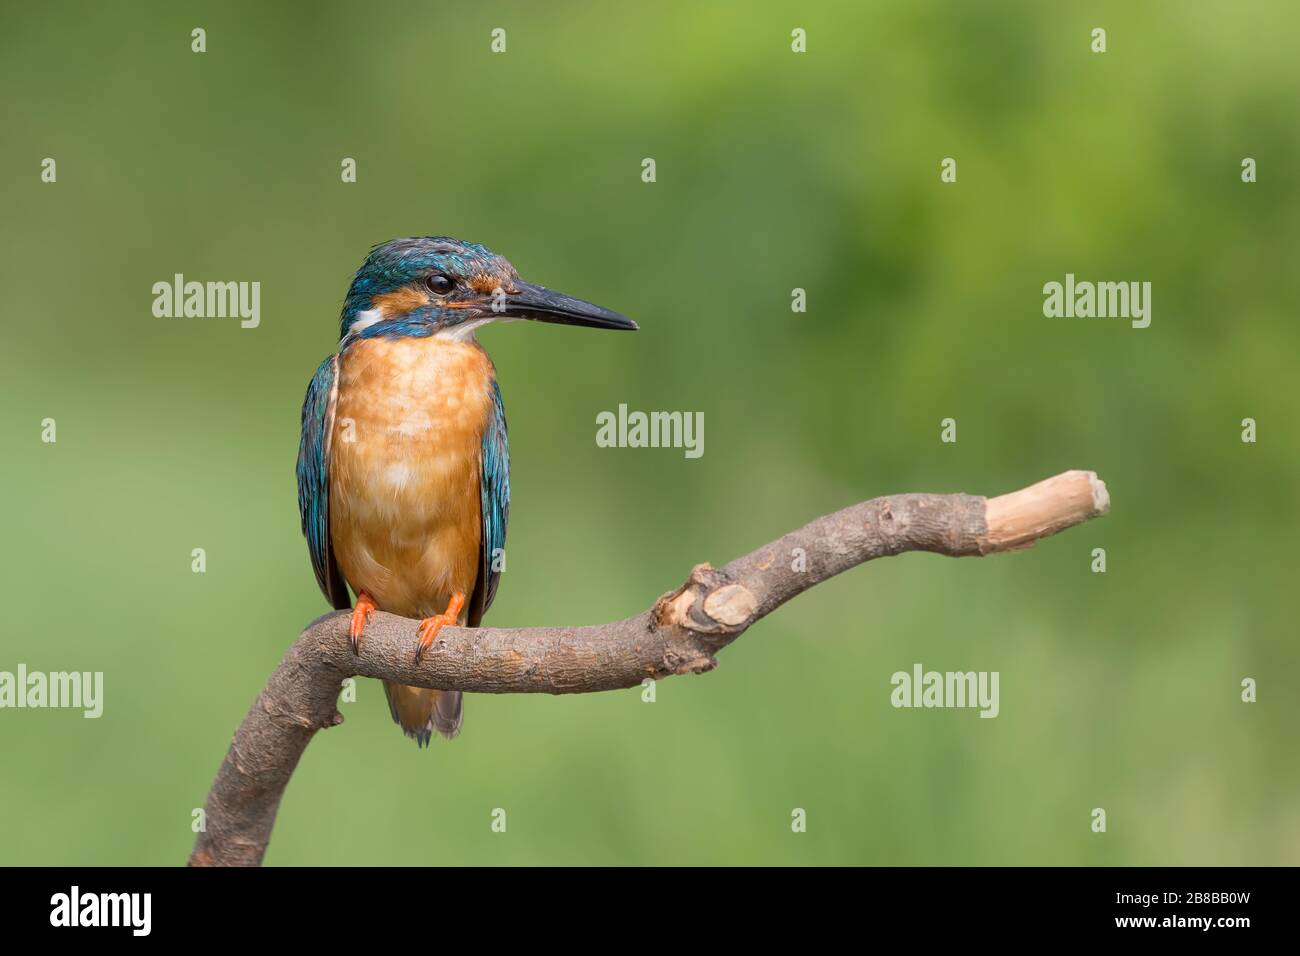 The colorful Kingfisher on branch (Alcedo atthis) Stock Photo